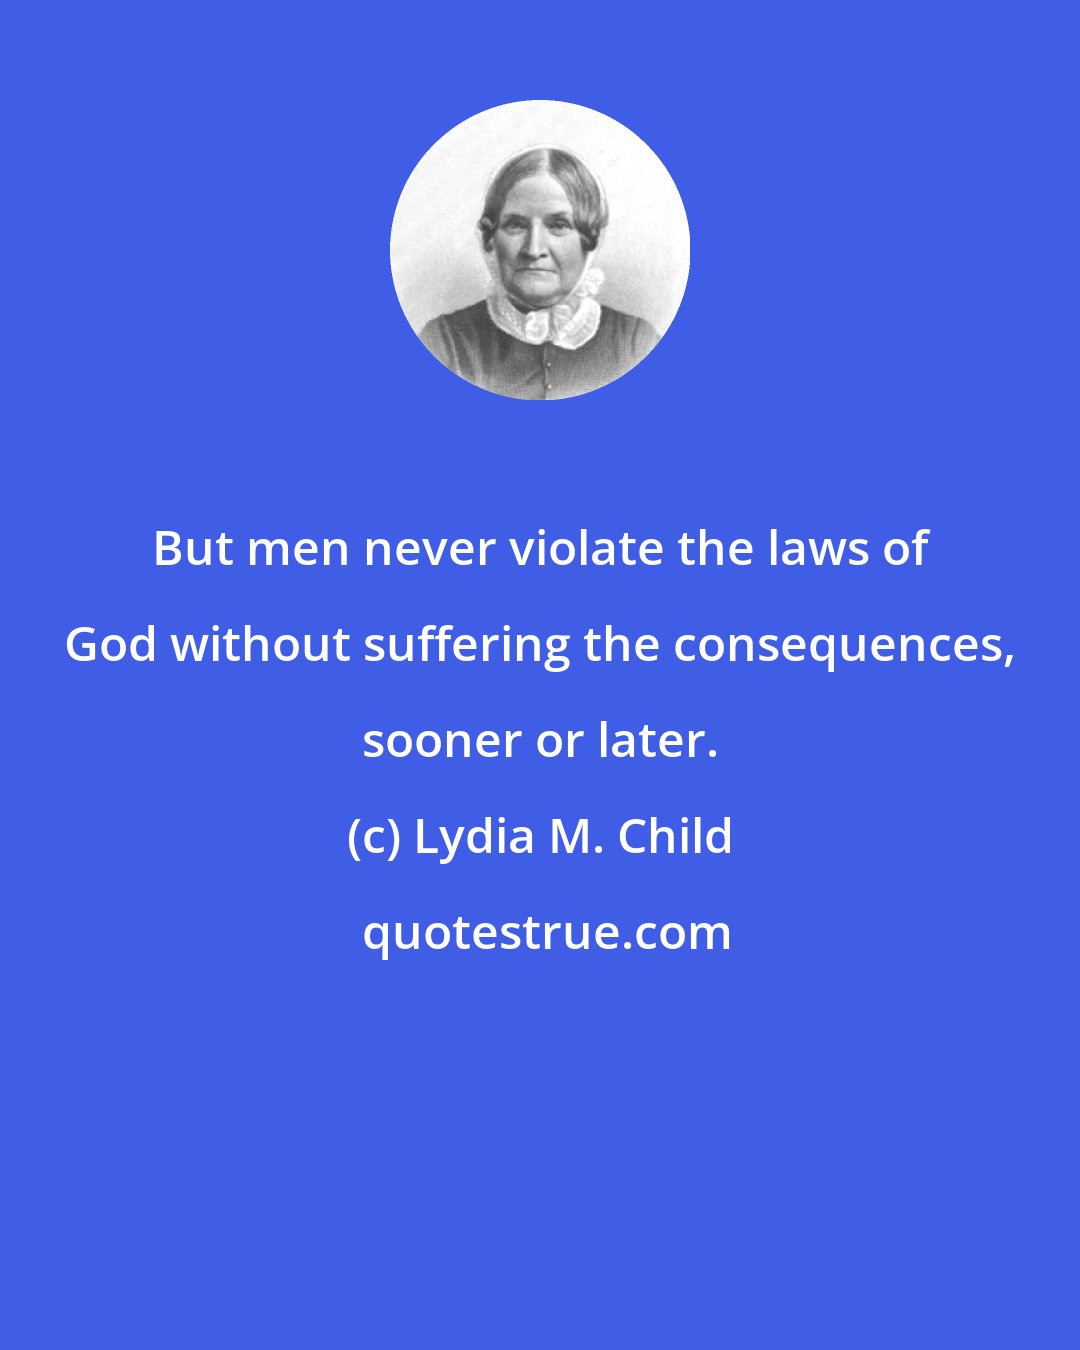 Lydia M. Child: But men never violate the laws of God without suffering the consequences, sooner or later.